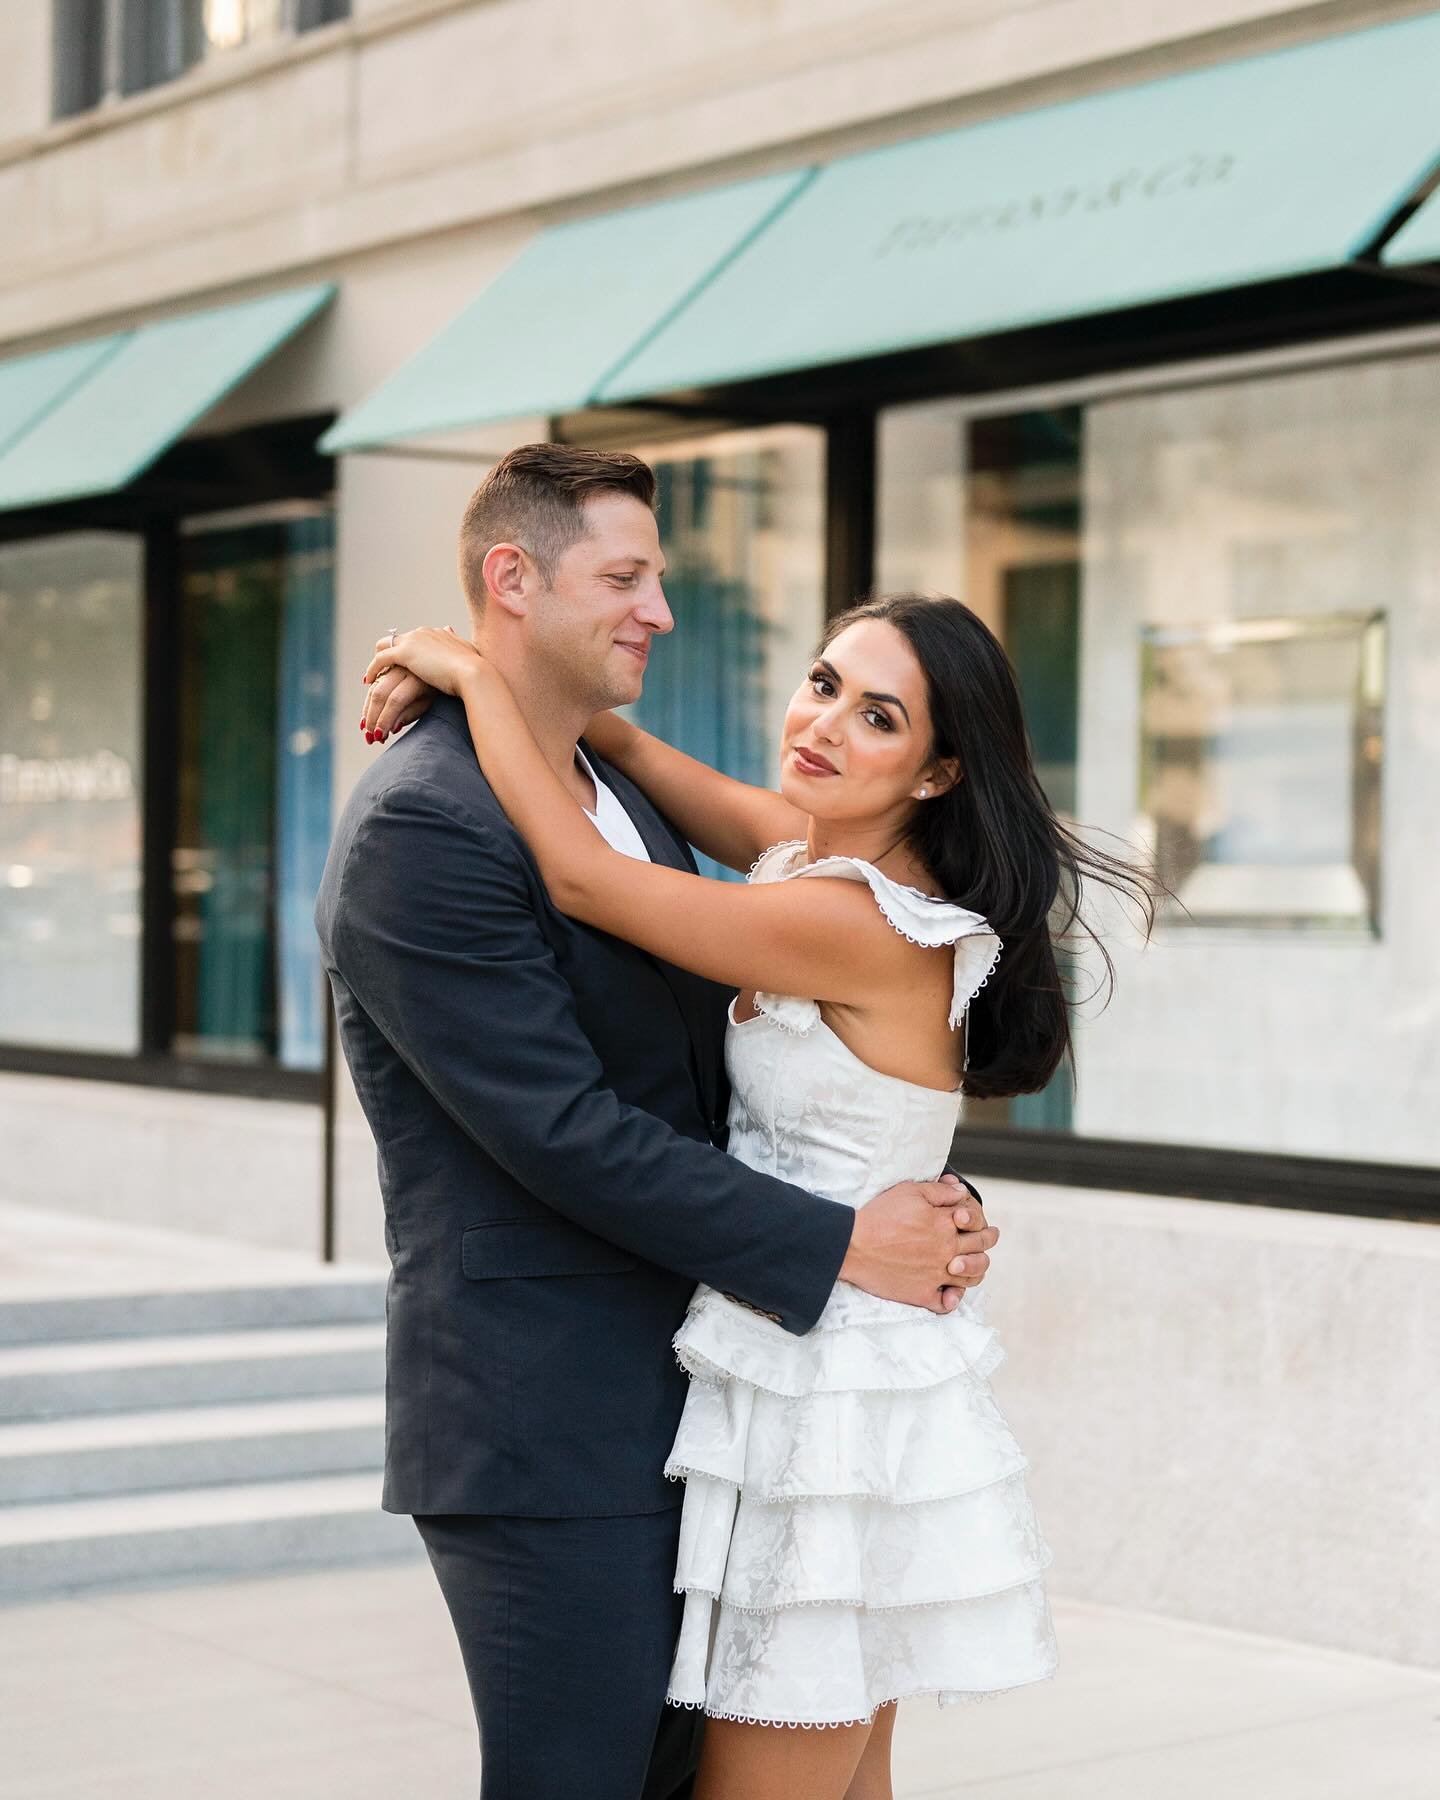 Move over, diamonds &ndash; Boston's newest gem has some serious competition! 

Aspen's radiant smile outshines everything around her, especially when it's paired with Michael's dapper look.  These two are the epitome of stylish elegance, and their p